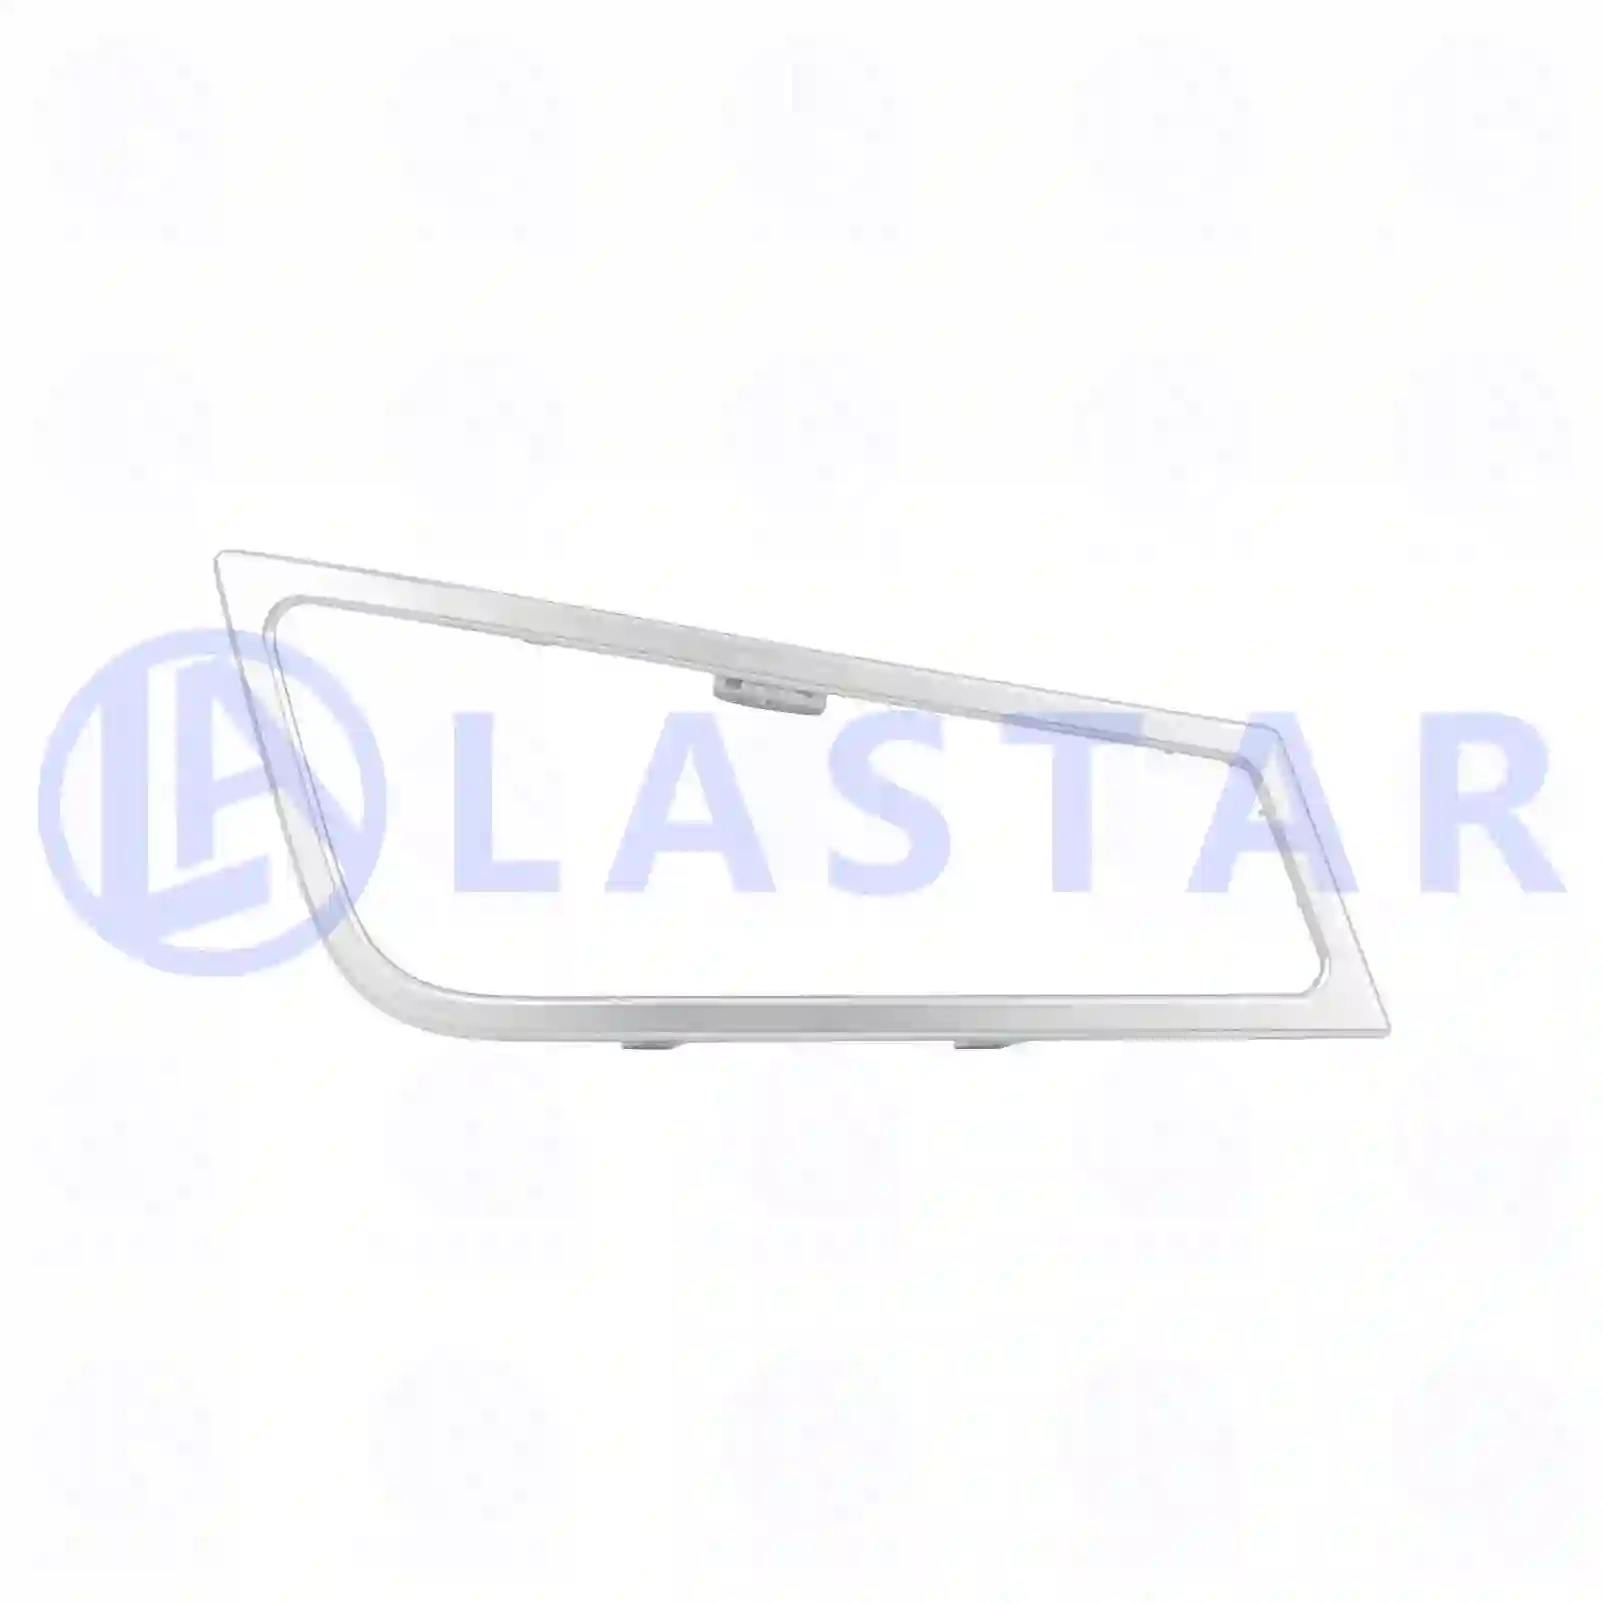  Auxiliary lamp frame, right, silver || Lastar Spare Part | Truck Spare Parts, Auotomotive Spare Parts